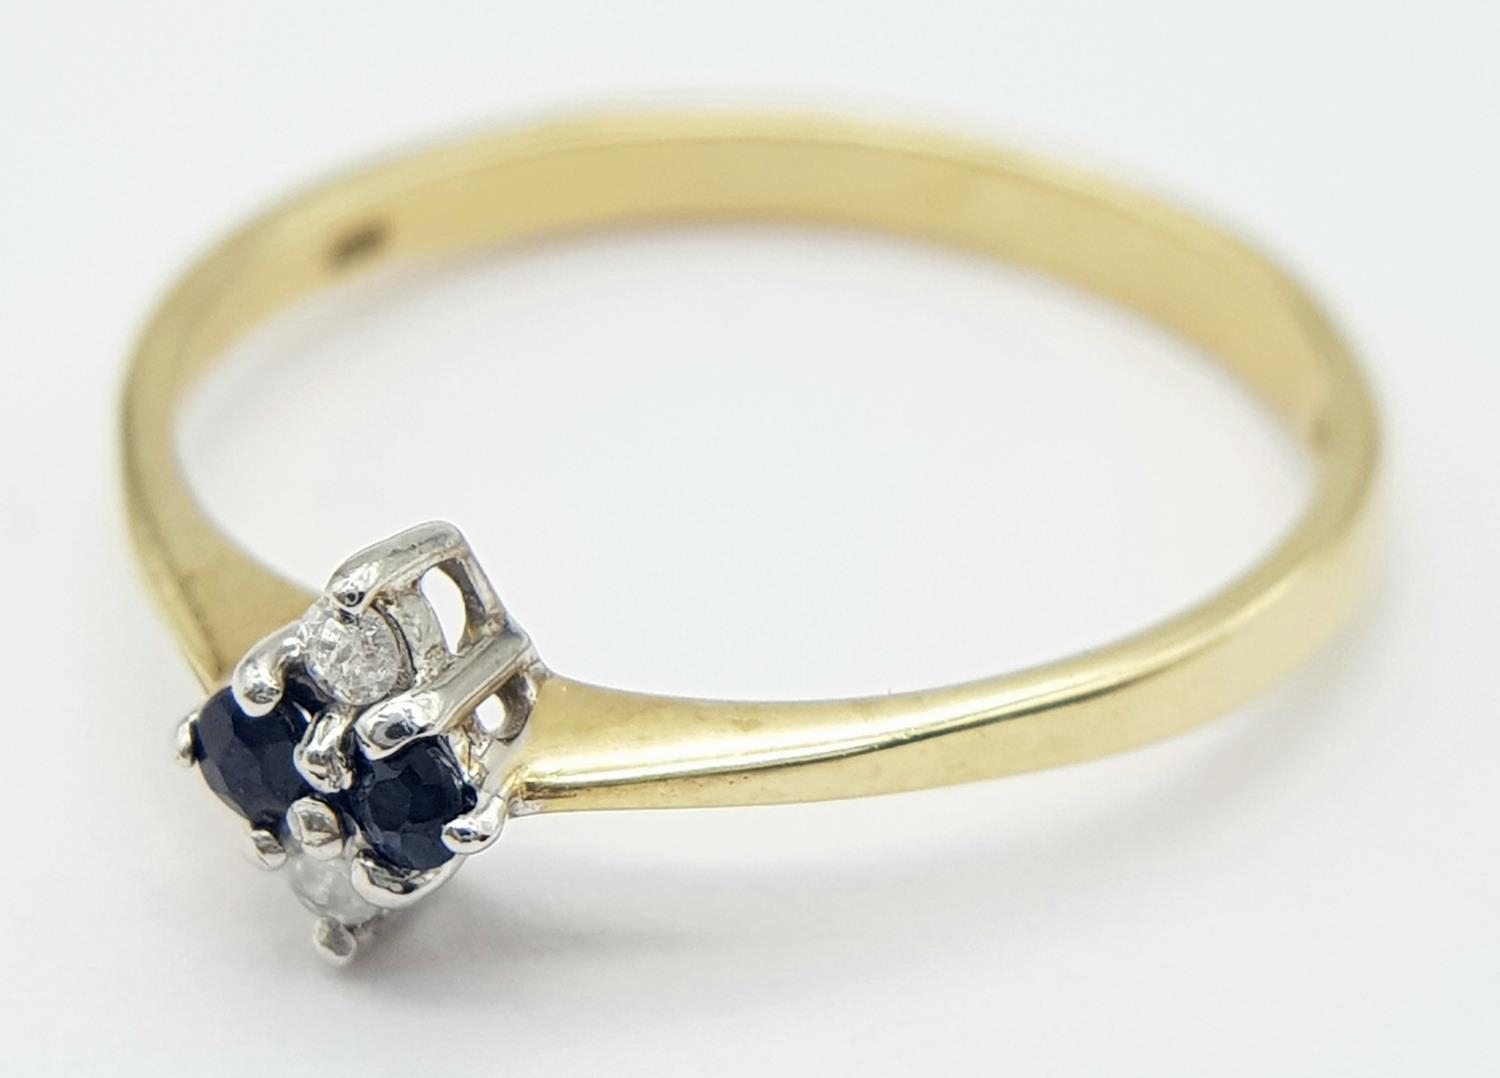 A 9K YELLOW GOLD DIAMOND & SAPPHIRE RING 1.4G SIZE O 1/2. ref: SPAS 9018 - Image 3 of 5